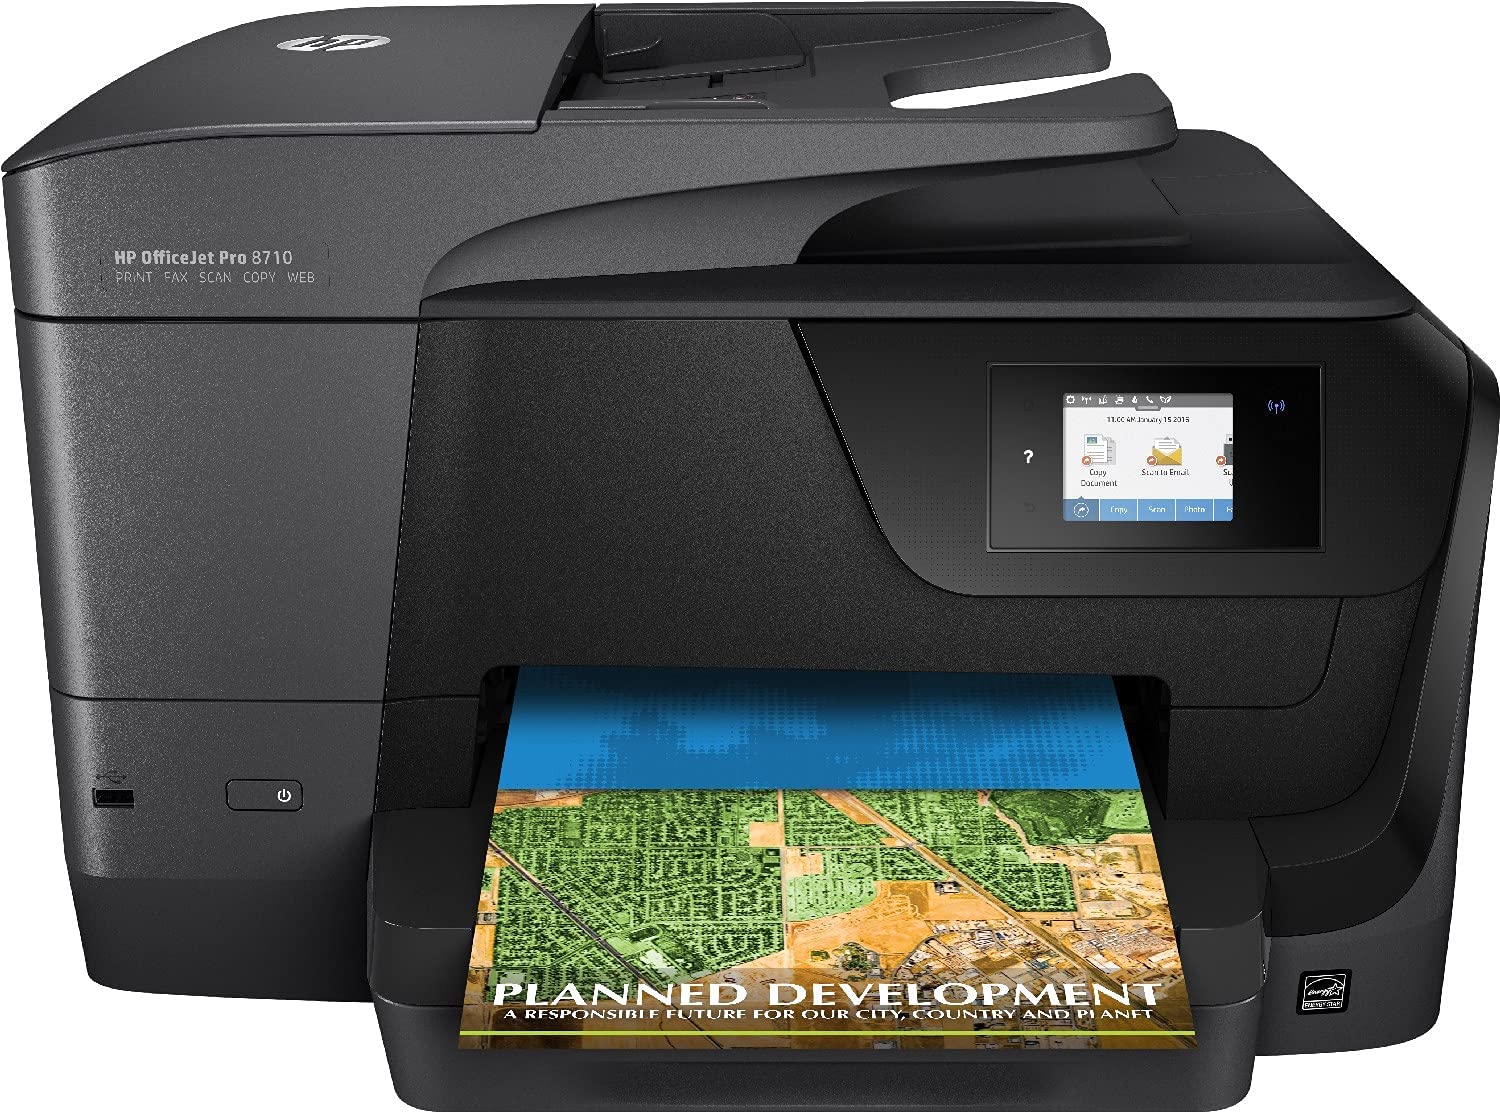 How to Install HP OfficeJet Pro 8710/8715/8720 on Ubuntu GNU/Linux - Featured